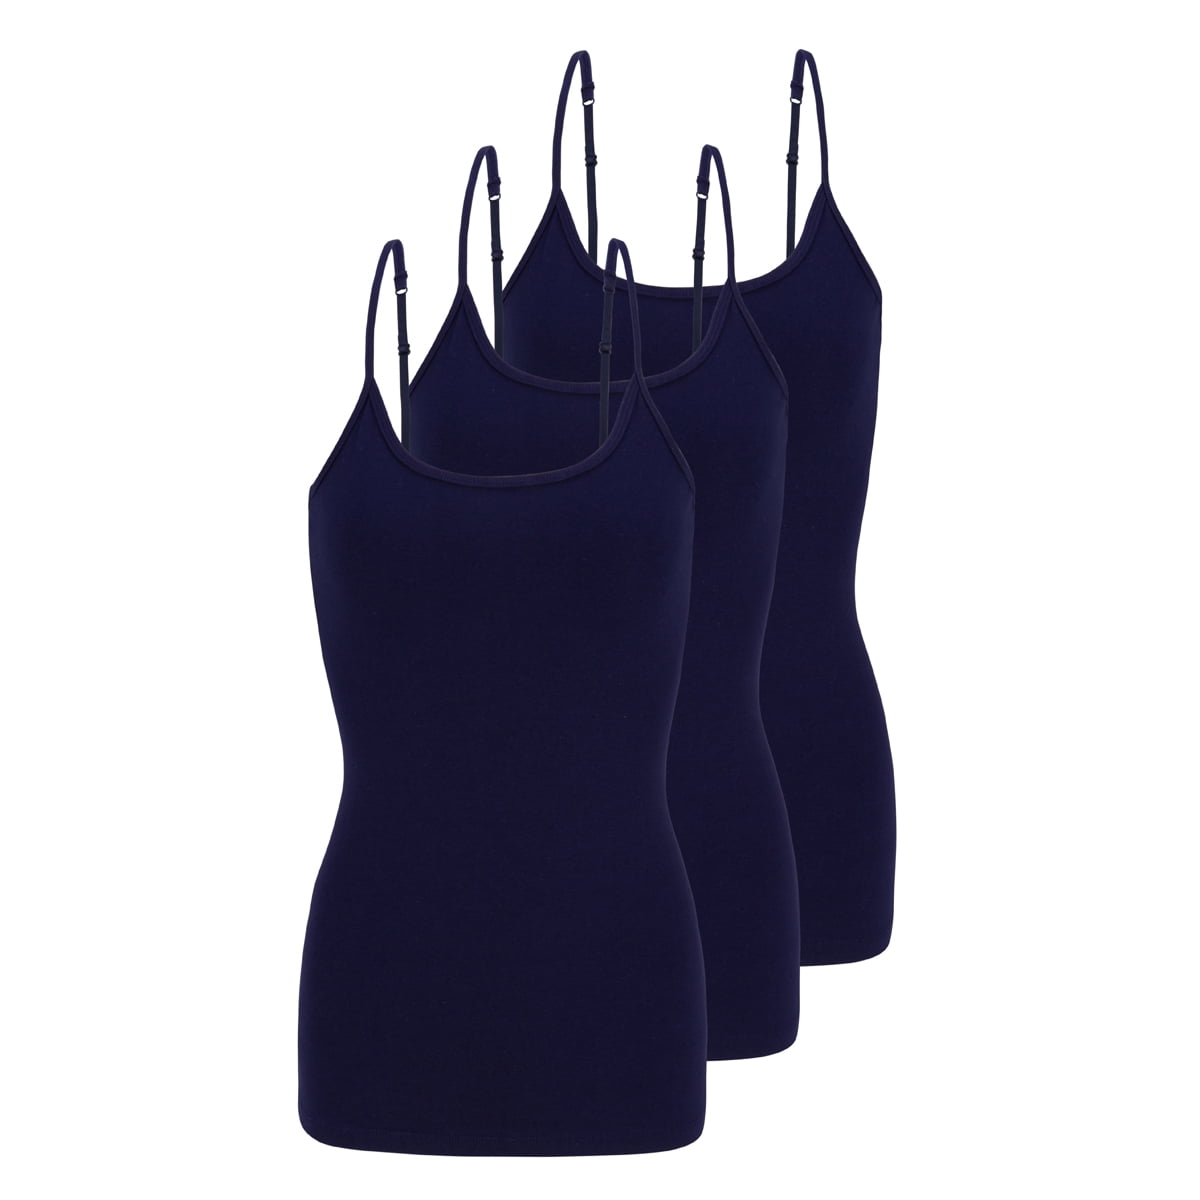 AMVELOP Adjustable Camisole for Women Spaghetti Strap Tank Top Camisoles, 4  Pack- Black Gray White Navy Blue, M price in UAE,  UAE